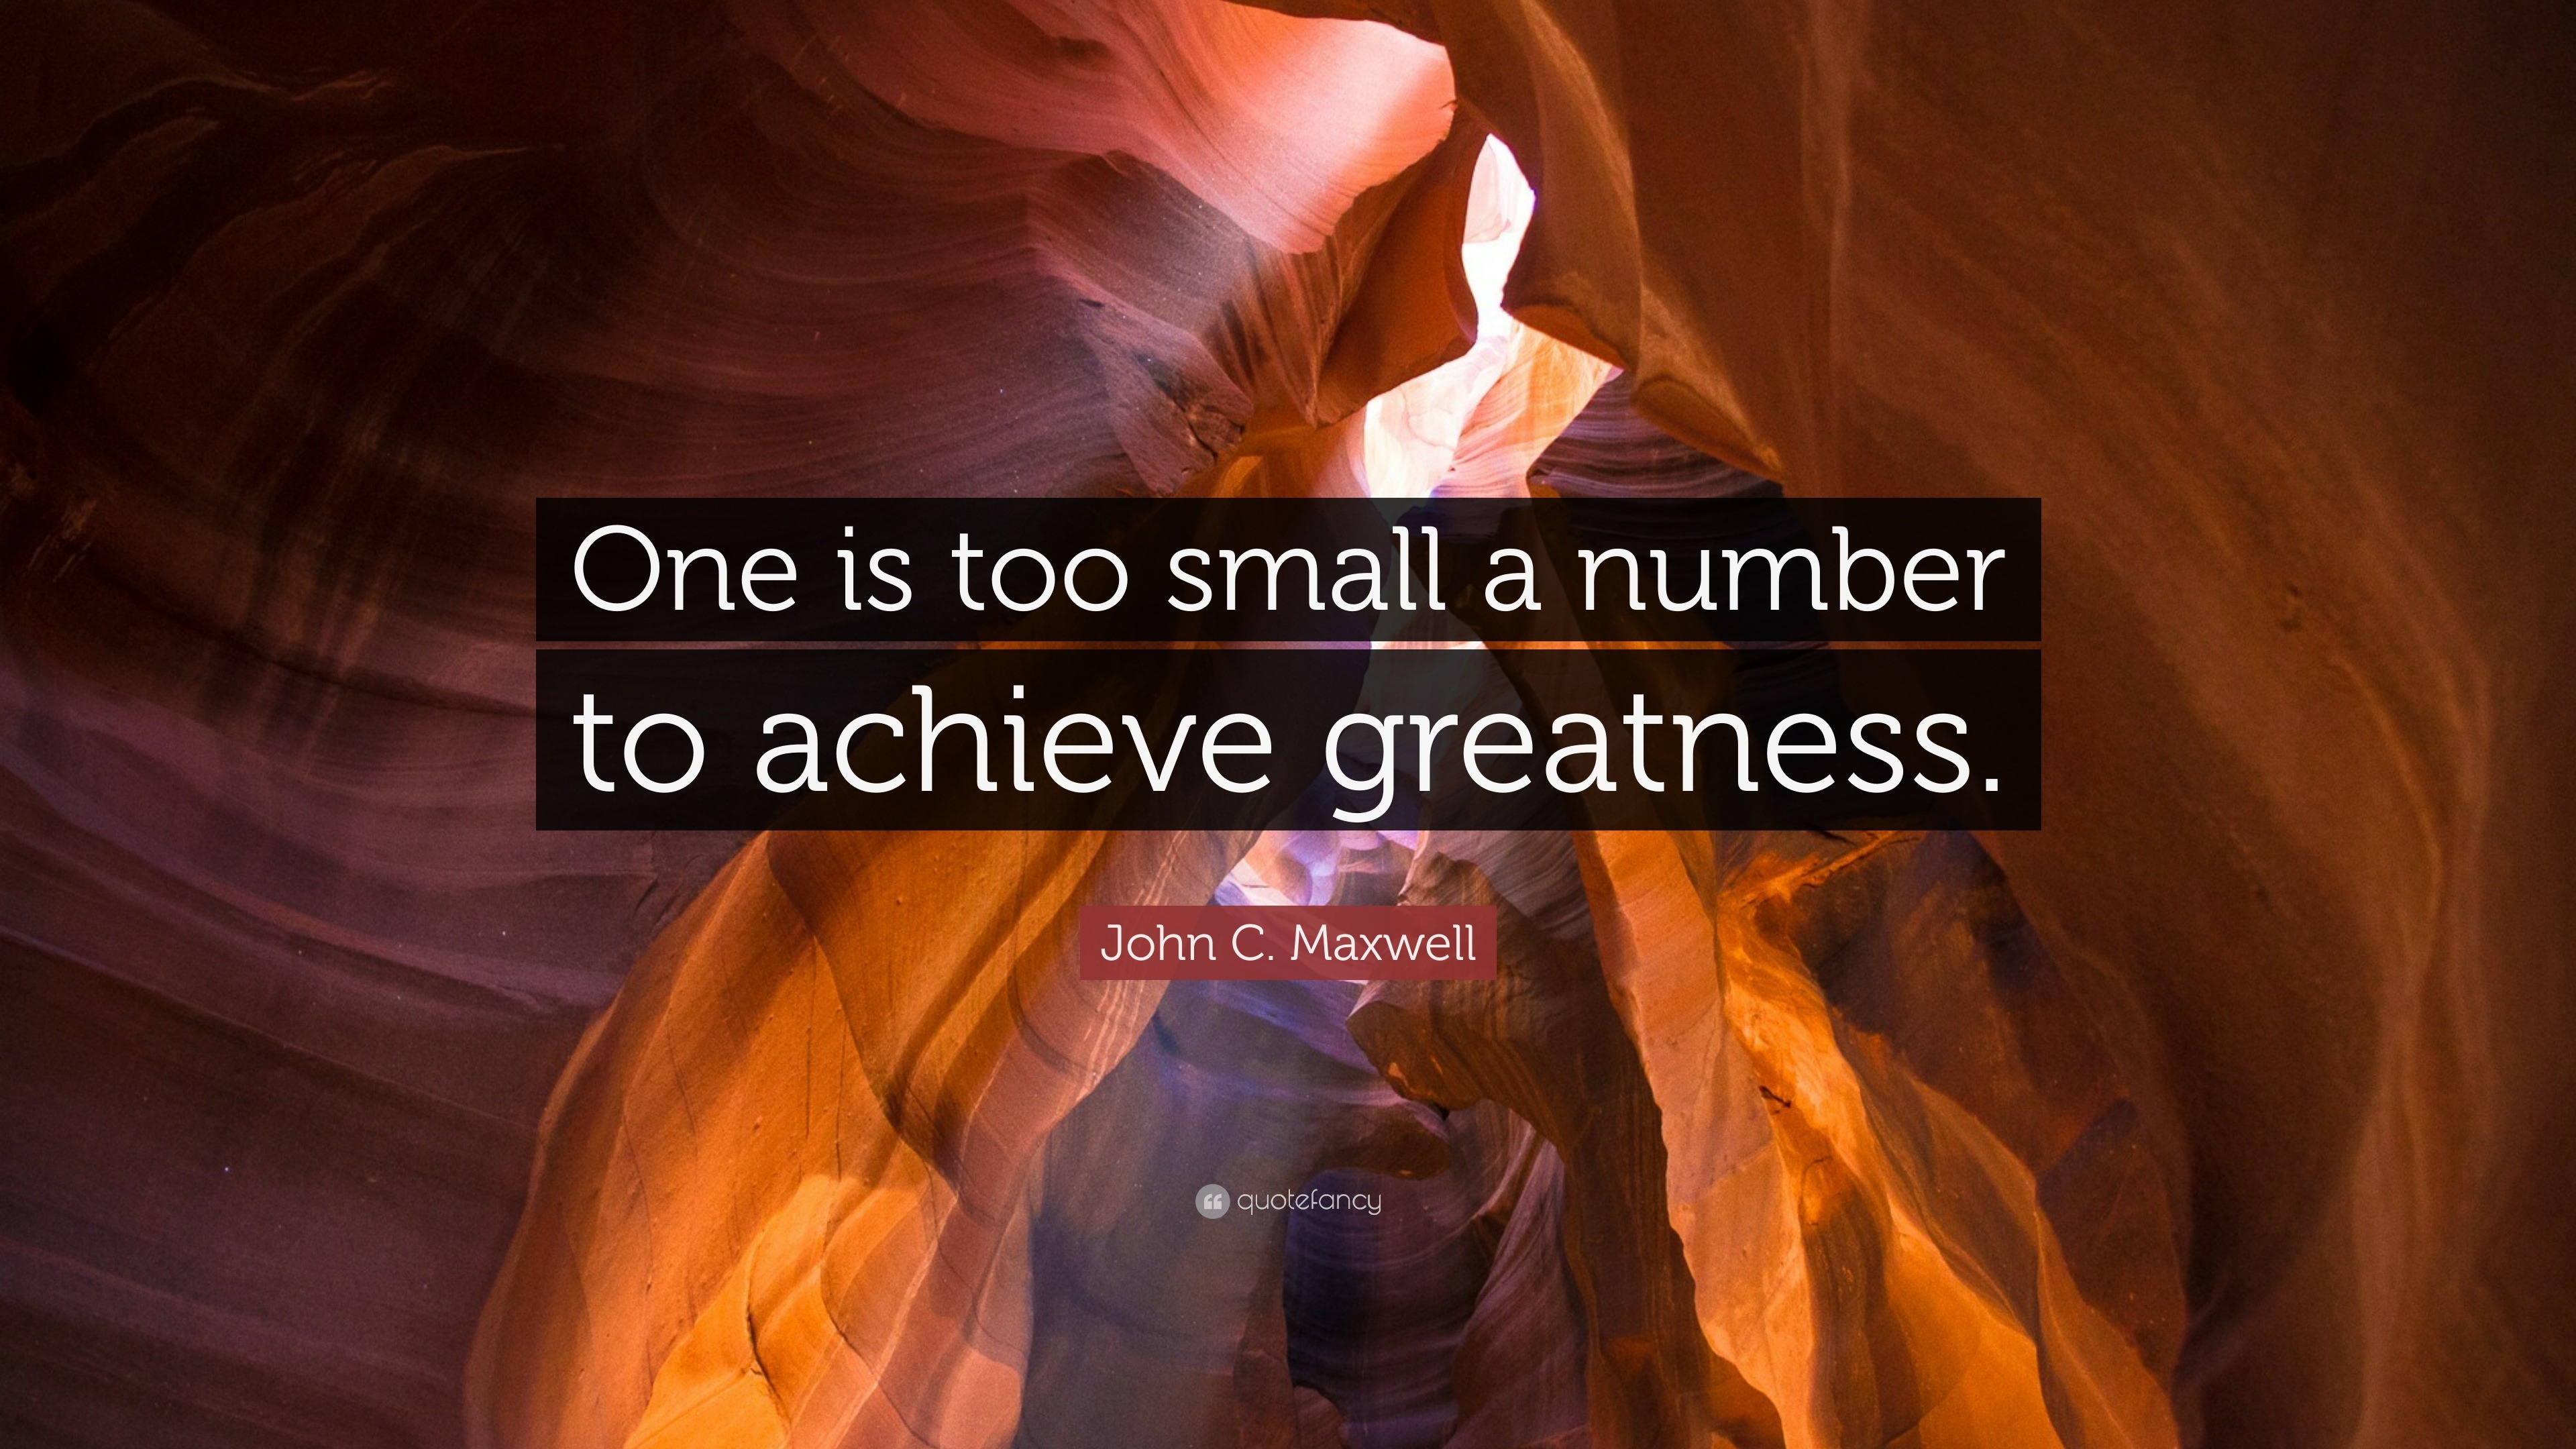 One is too small a number to achieve greatness” #community #gym #team